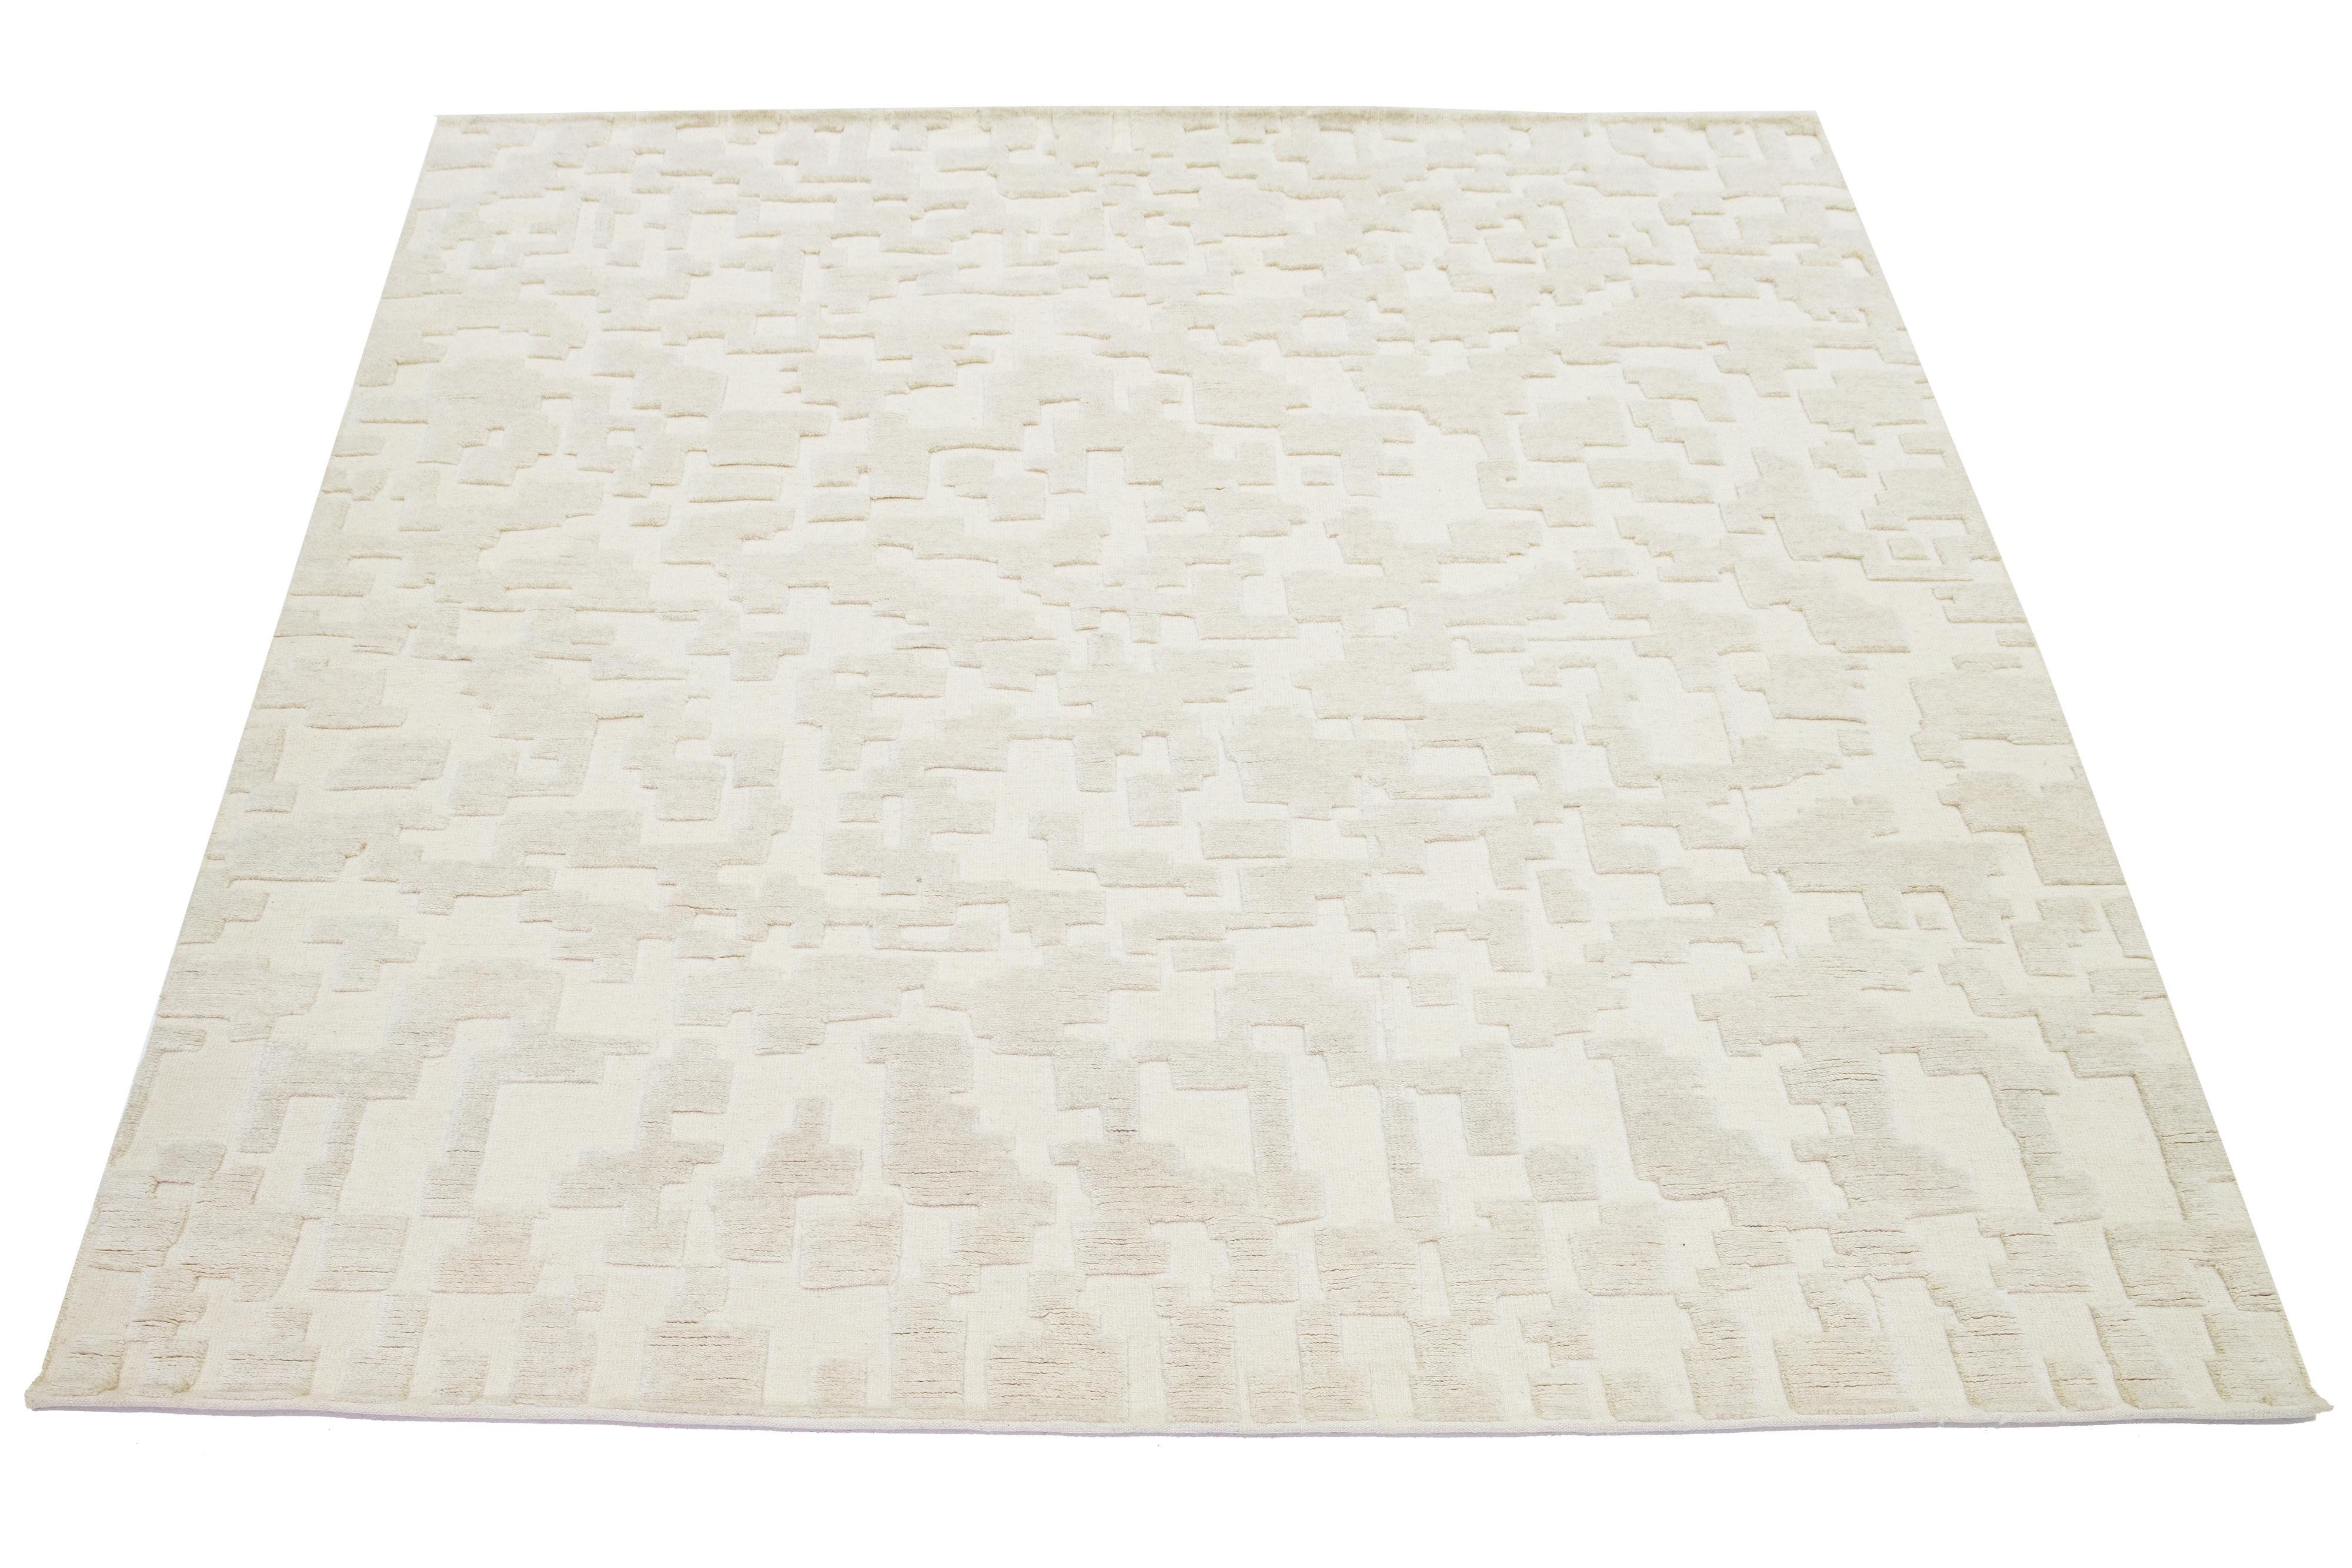 This hand-knotted Moroccan-style wool rug showcases a mesmerizing minimalist aesthetic on a natural ivory field with a contemporary abstract design.

This rug measures 8'2